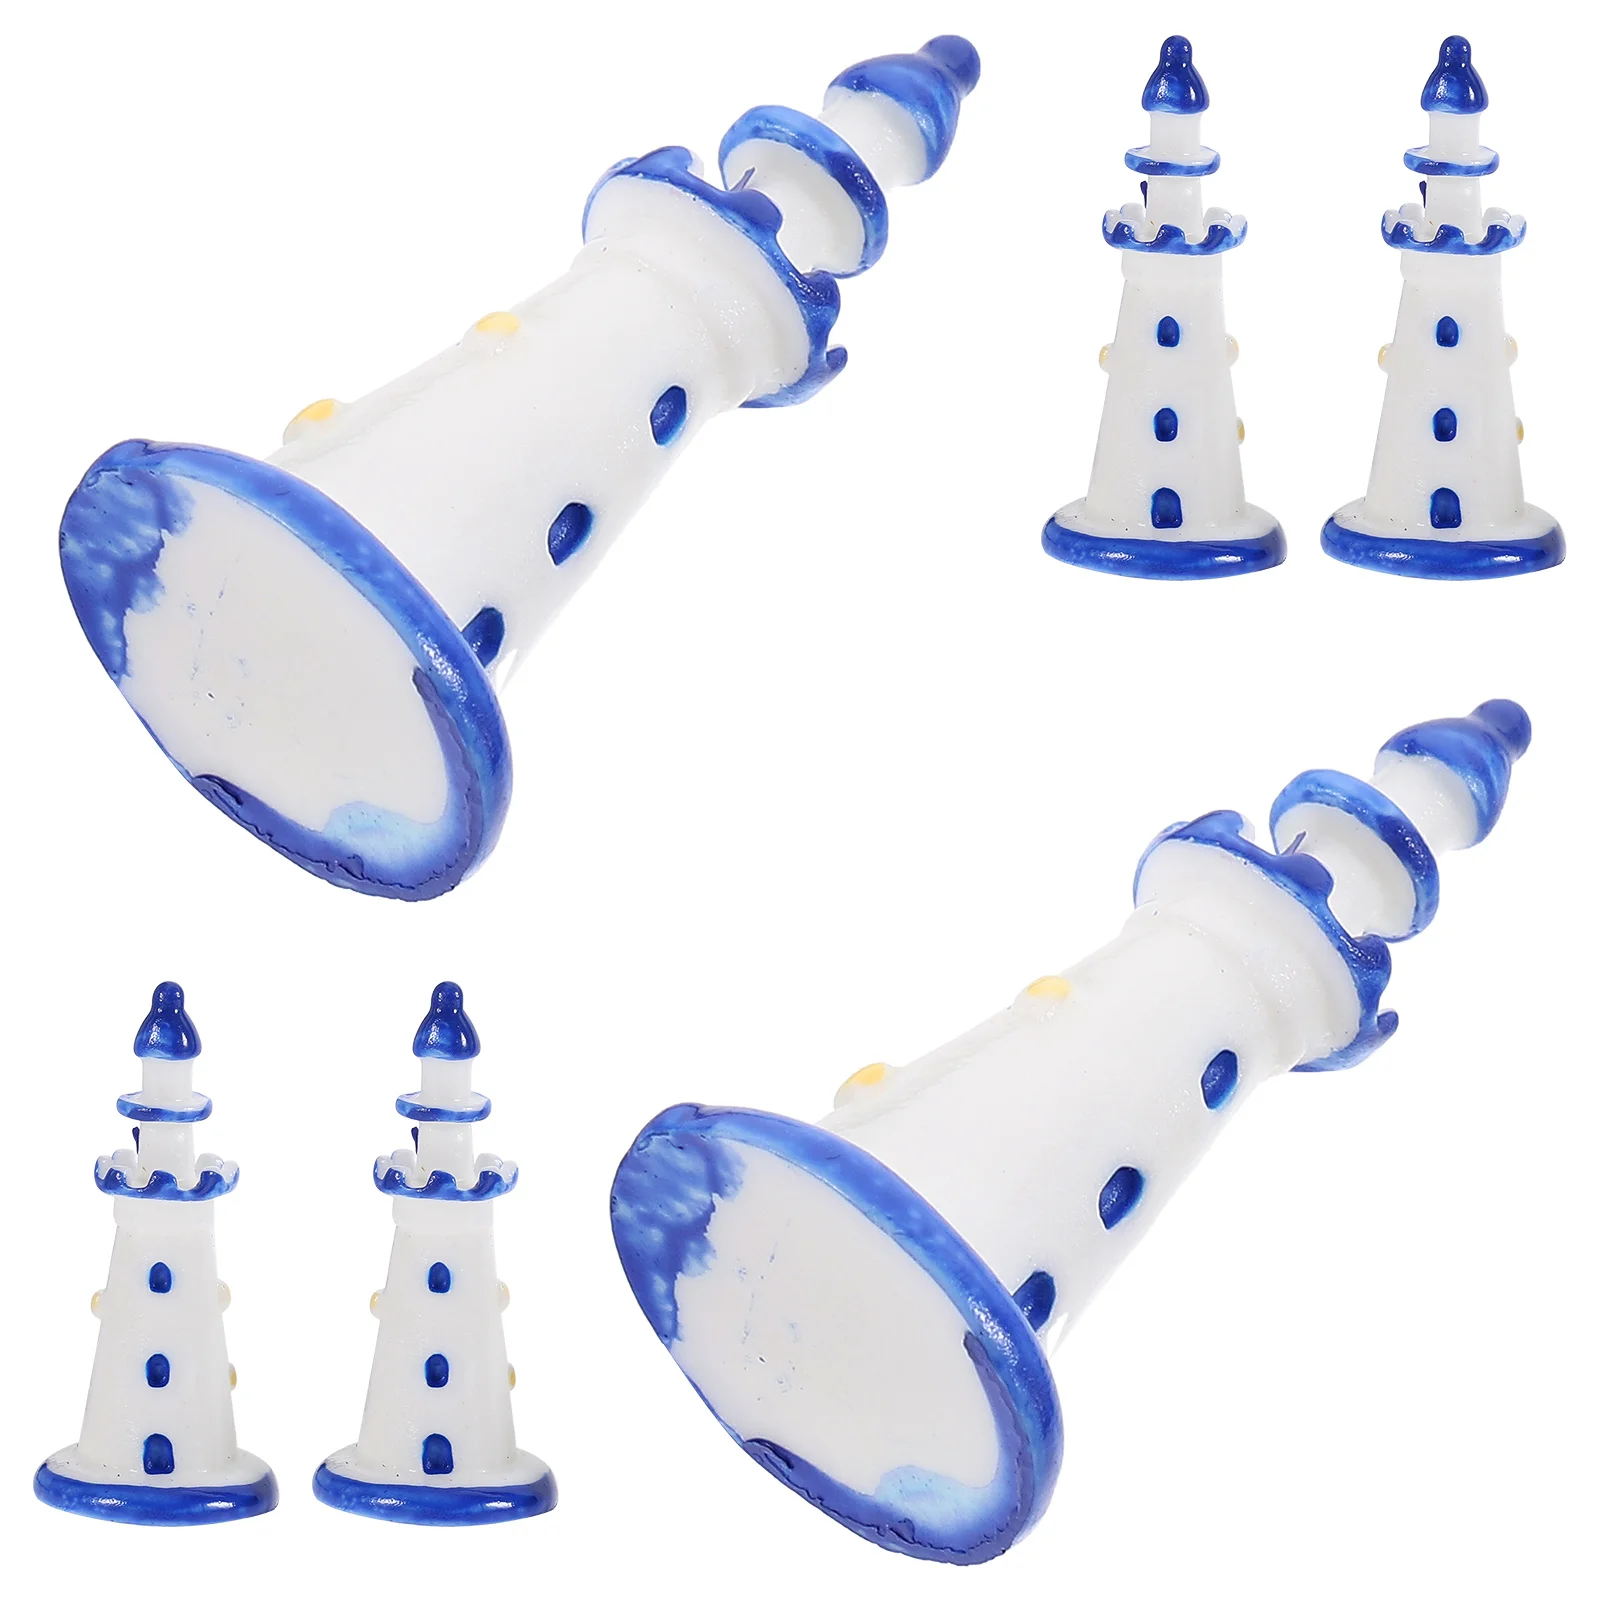 10 Pcs Household Mini Lighthouse Home Decor Scenery Decorations Resin Photography Props dvotinst newborn baby photography props chef outfit theme set bread cooking nordic decorations costume studio shoot photo props